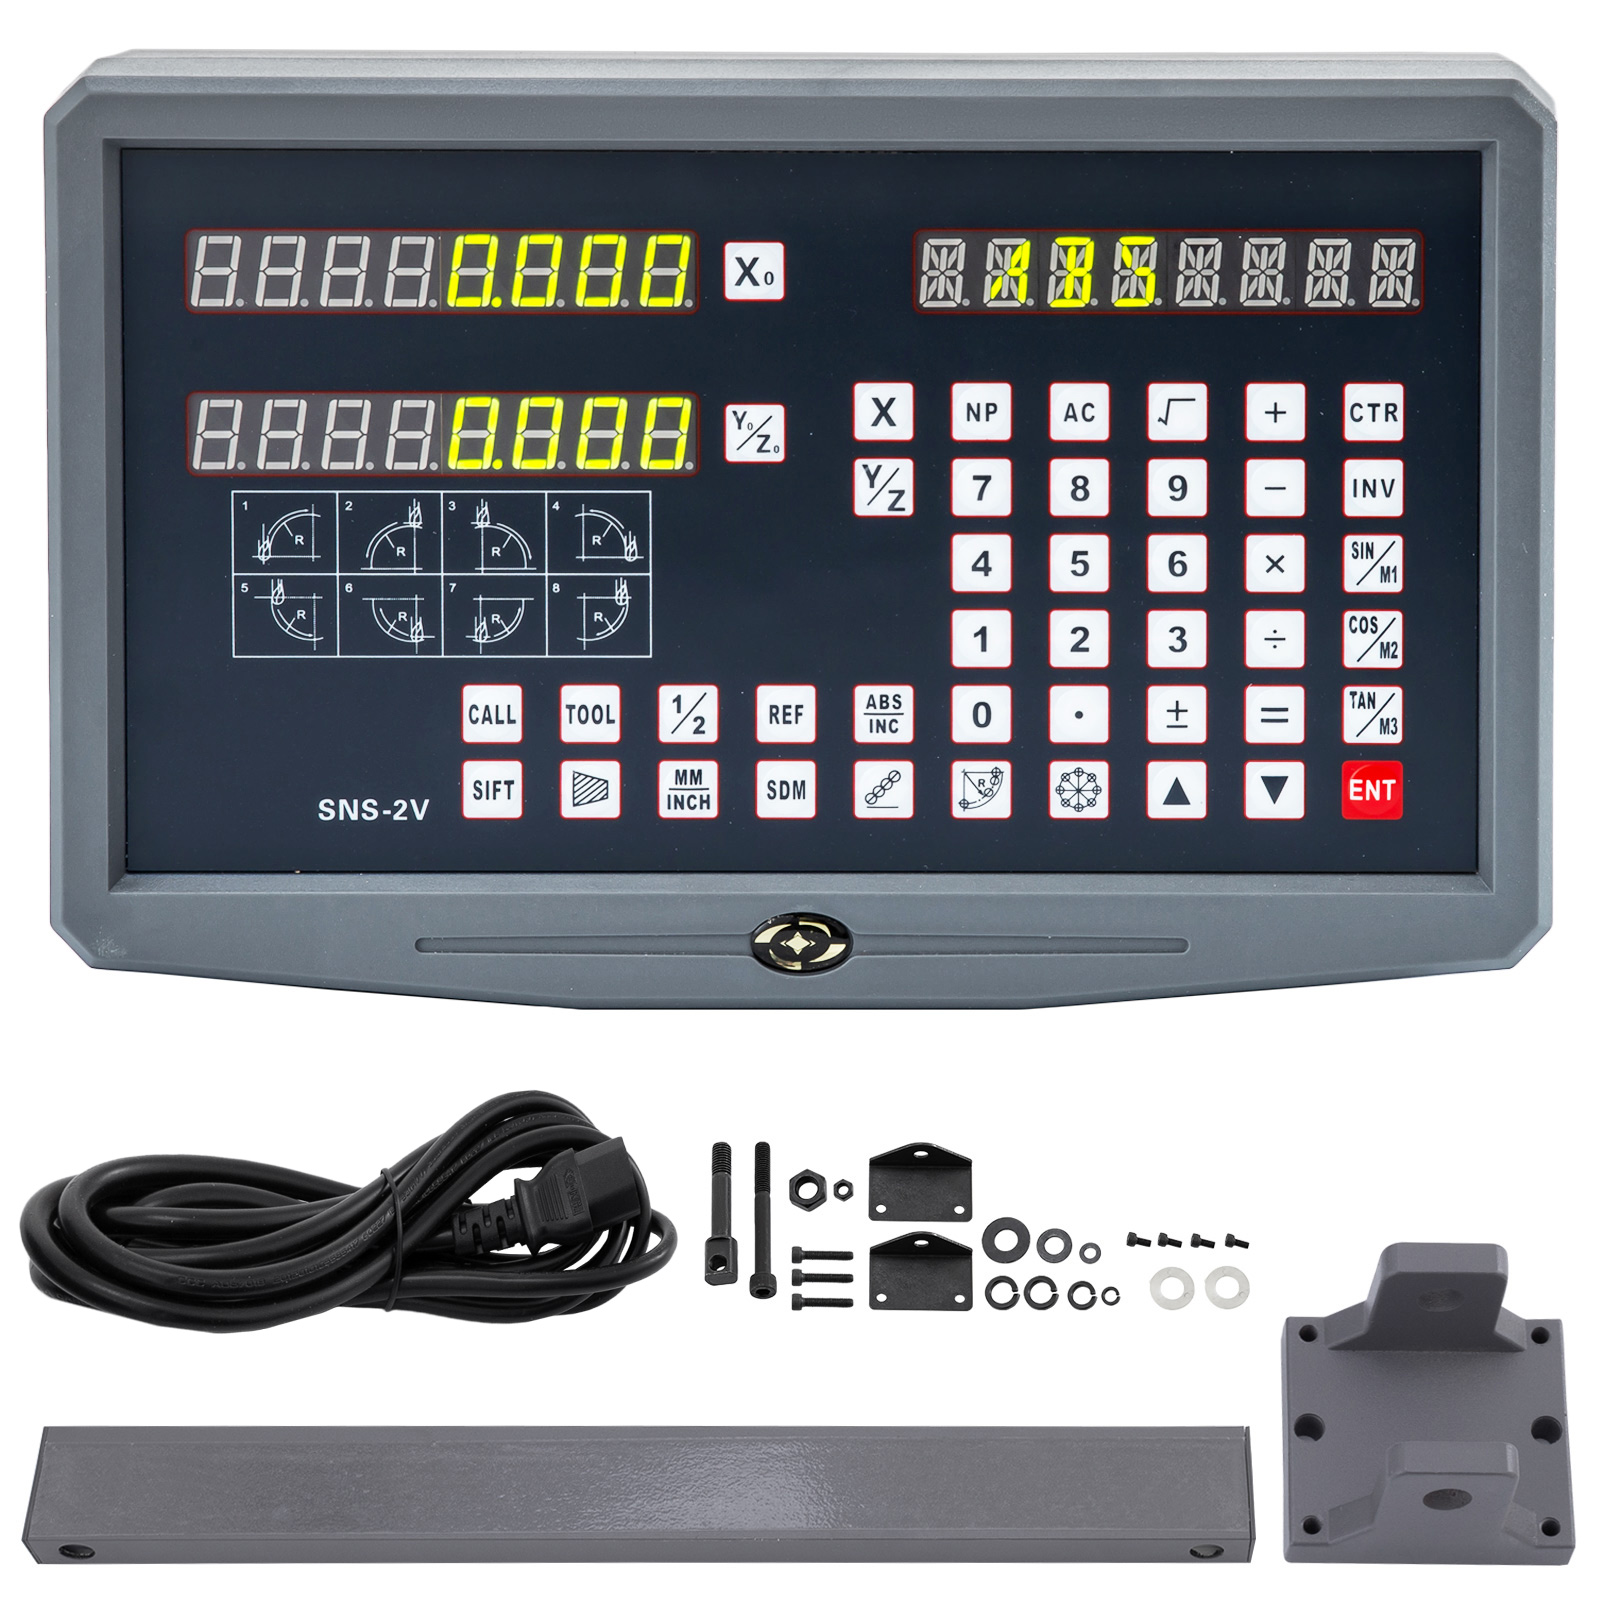 2/3Axis Digtal/LCD DRO Readout Display and Linear Scale for Milling/Boring Lathe 